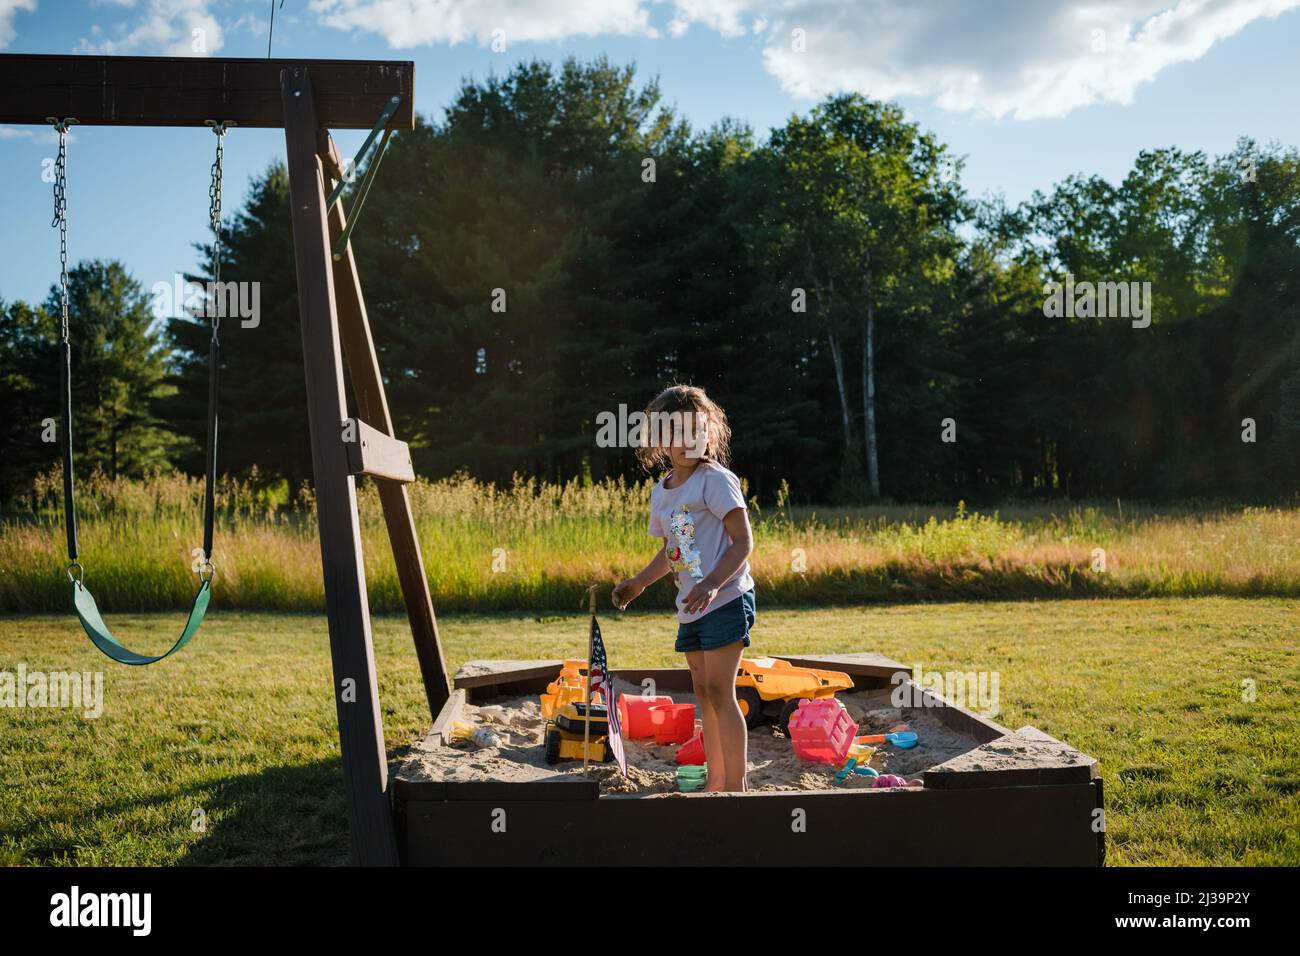 Young girl playing outside in sandbox Stock Photo